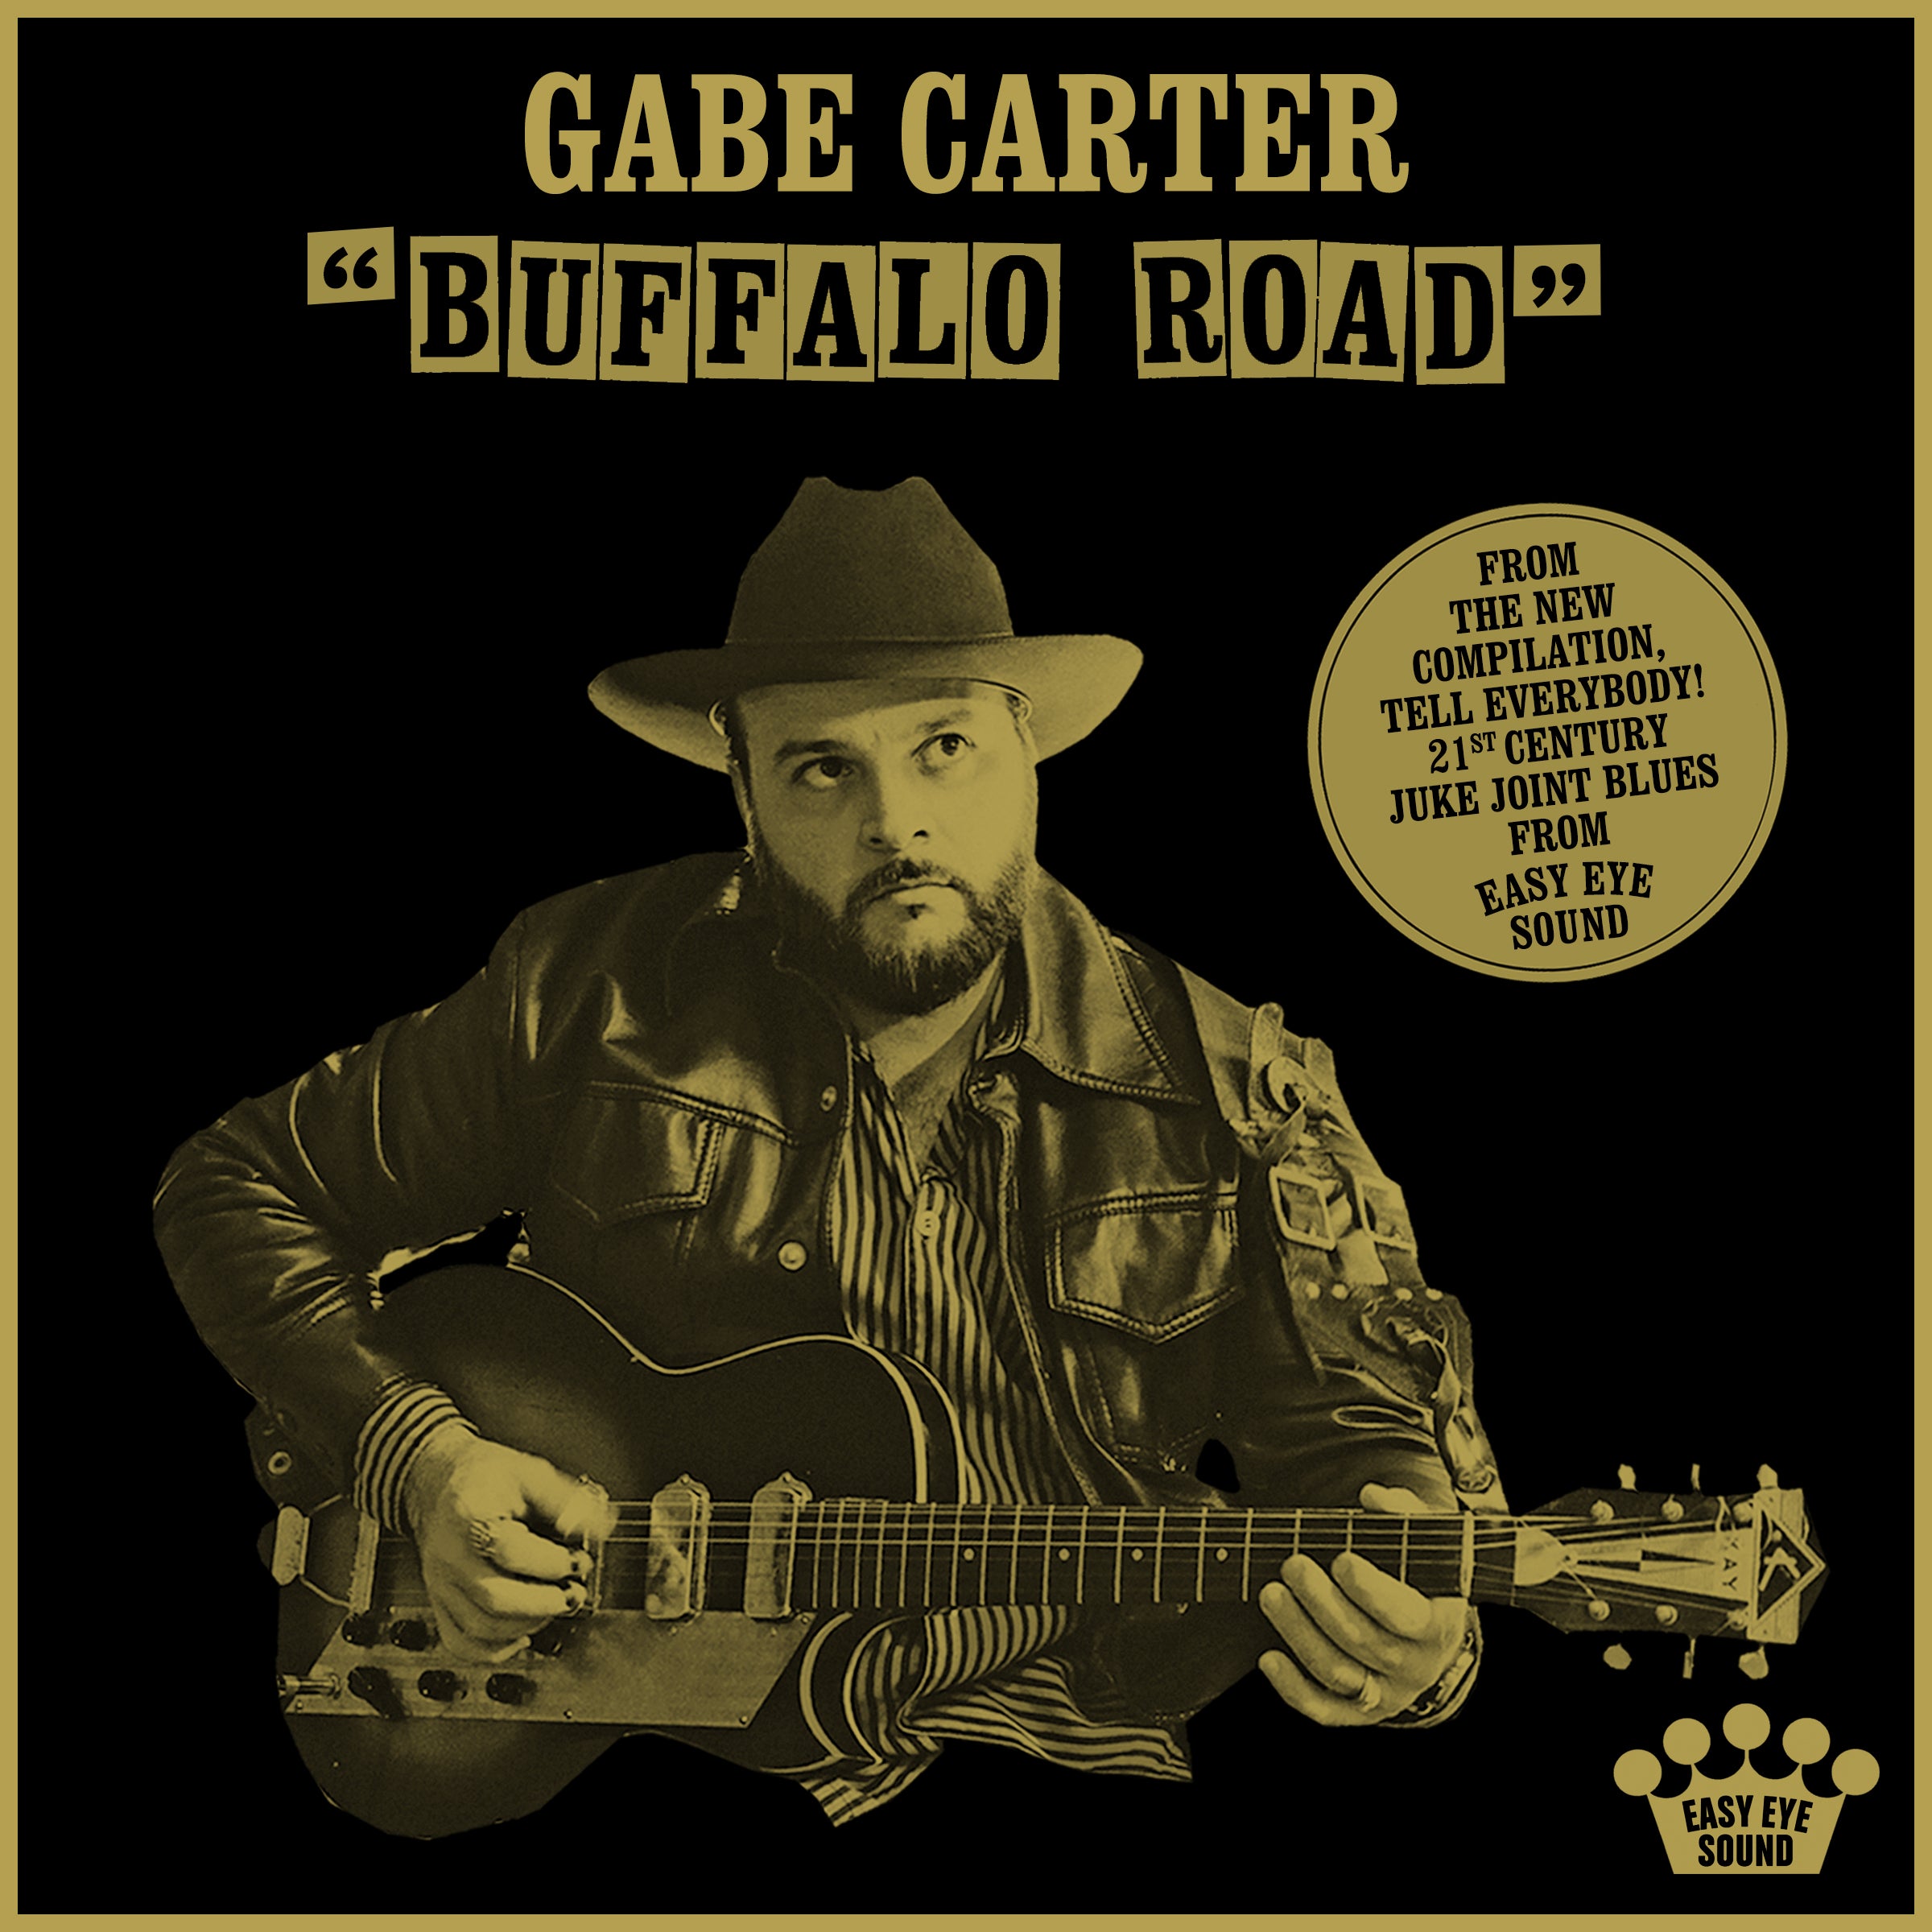 Listen to "Buffalo Road" by Gabe Carter now!